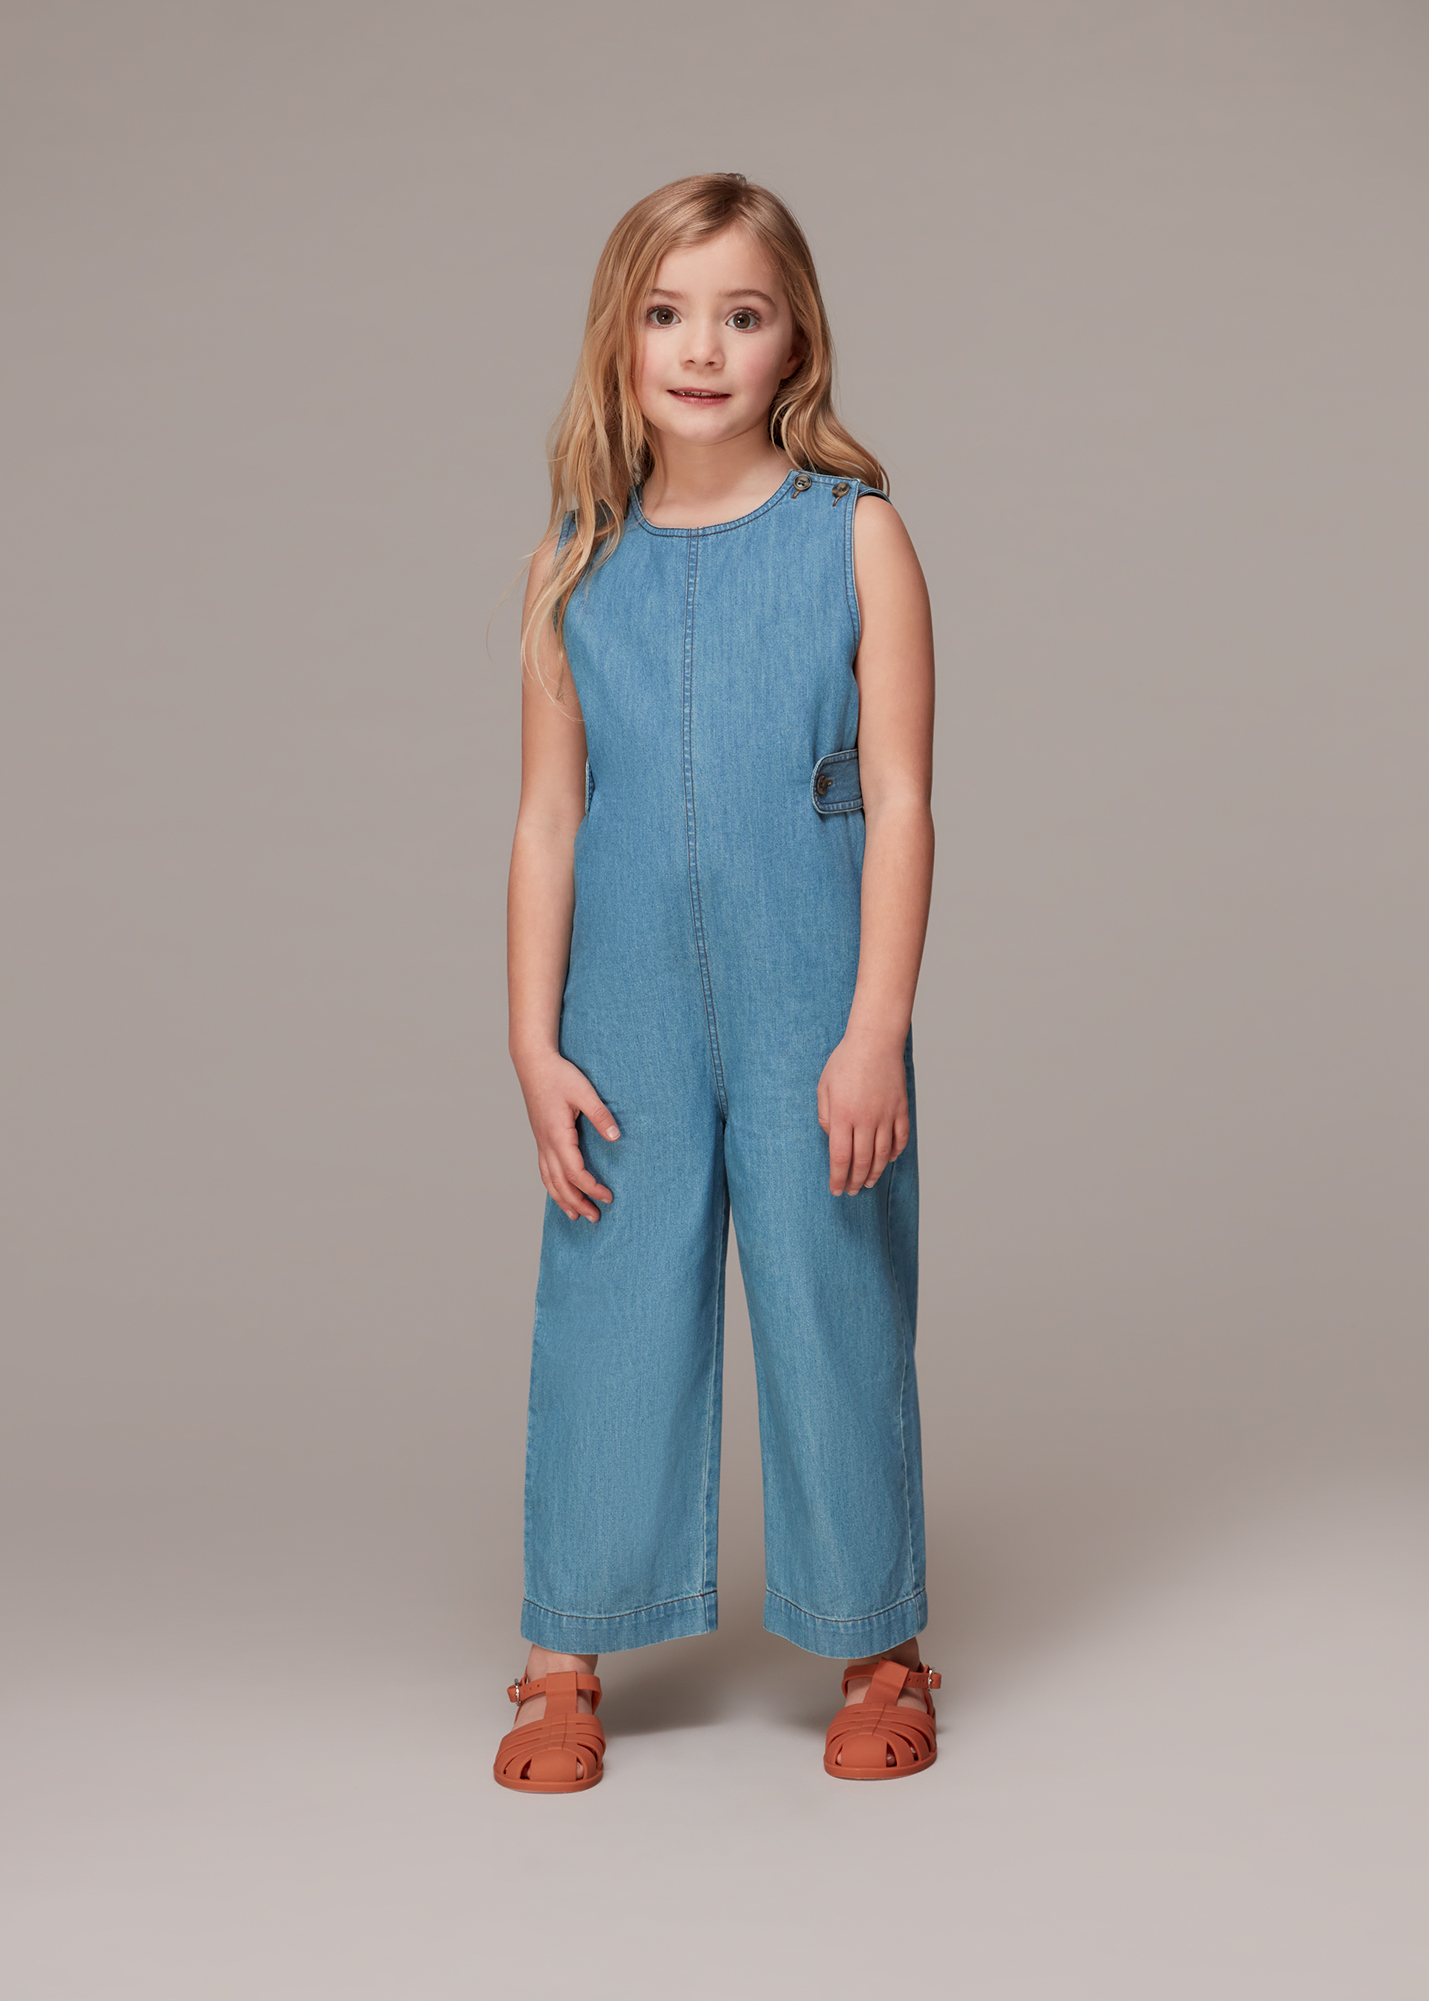 Whistles Kids Chambray Sydney Jumpsuit